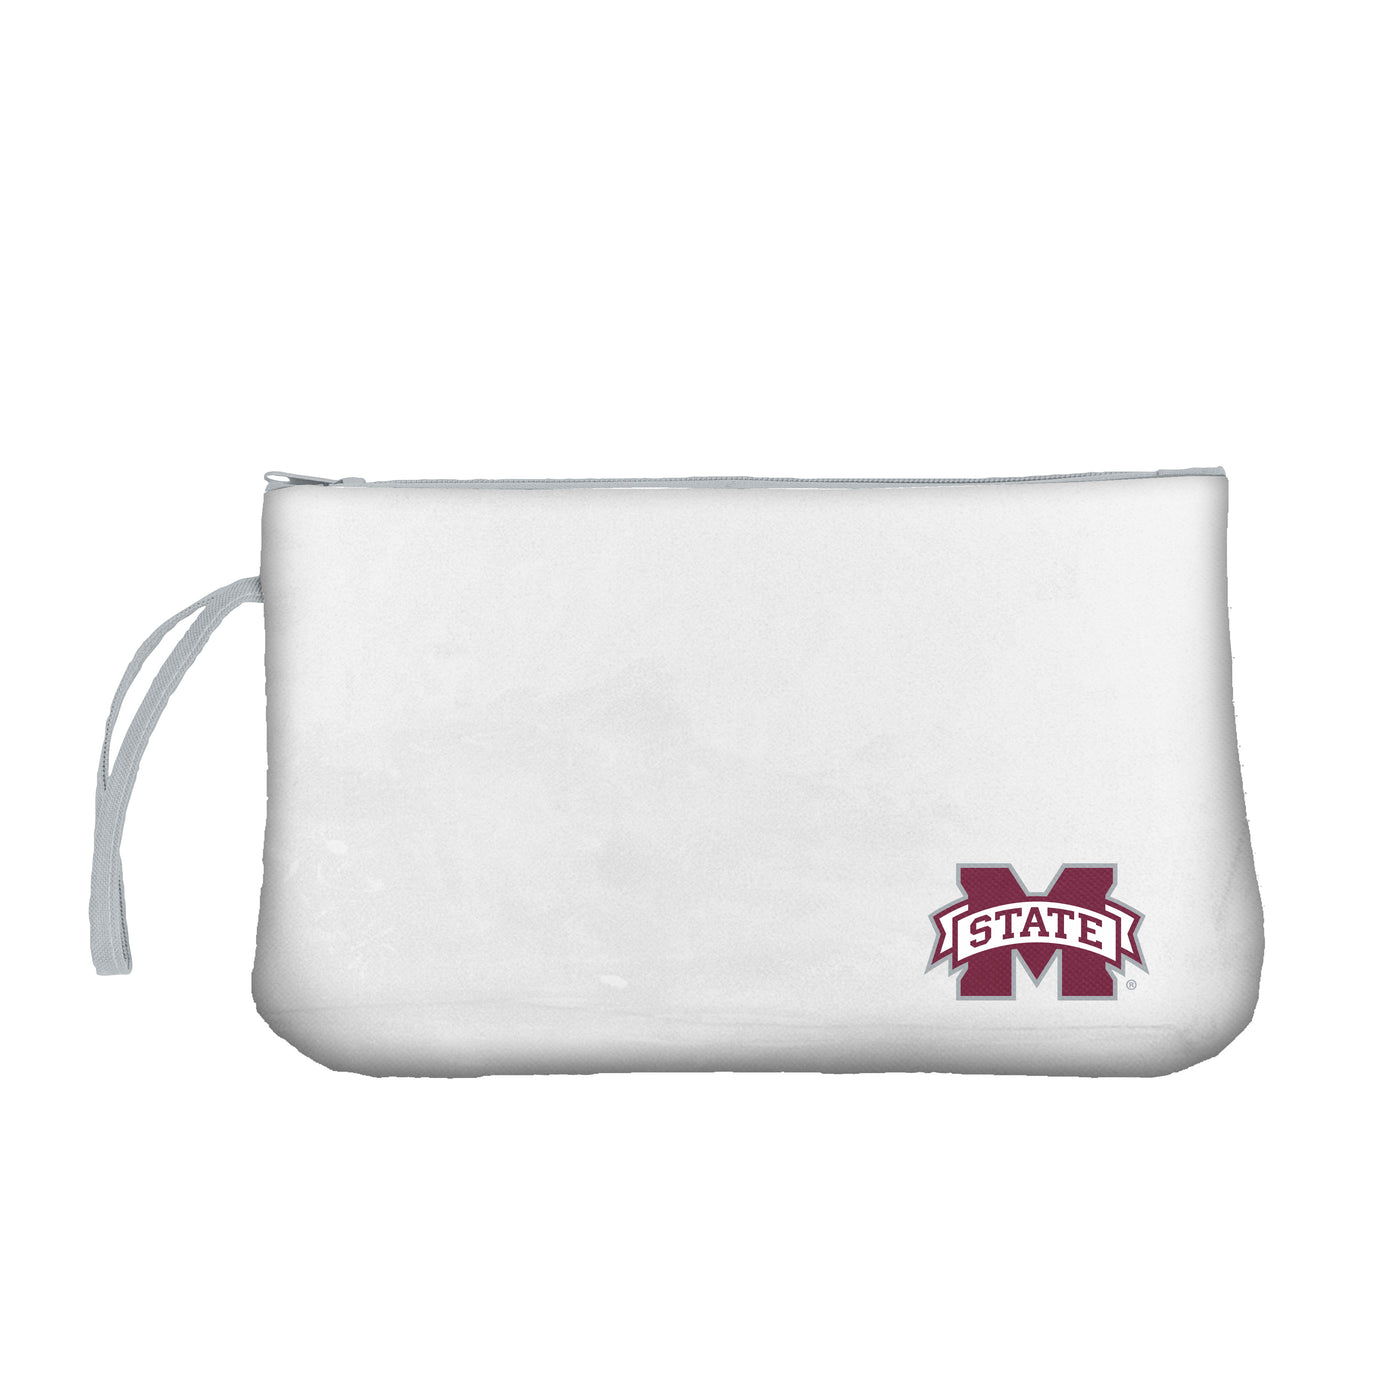 Mississippi State Clear Wristlet